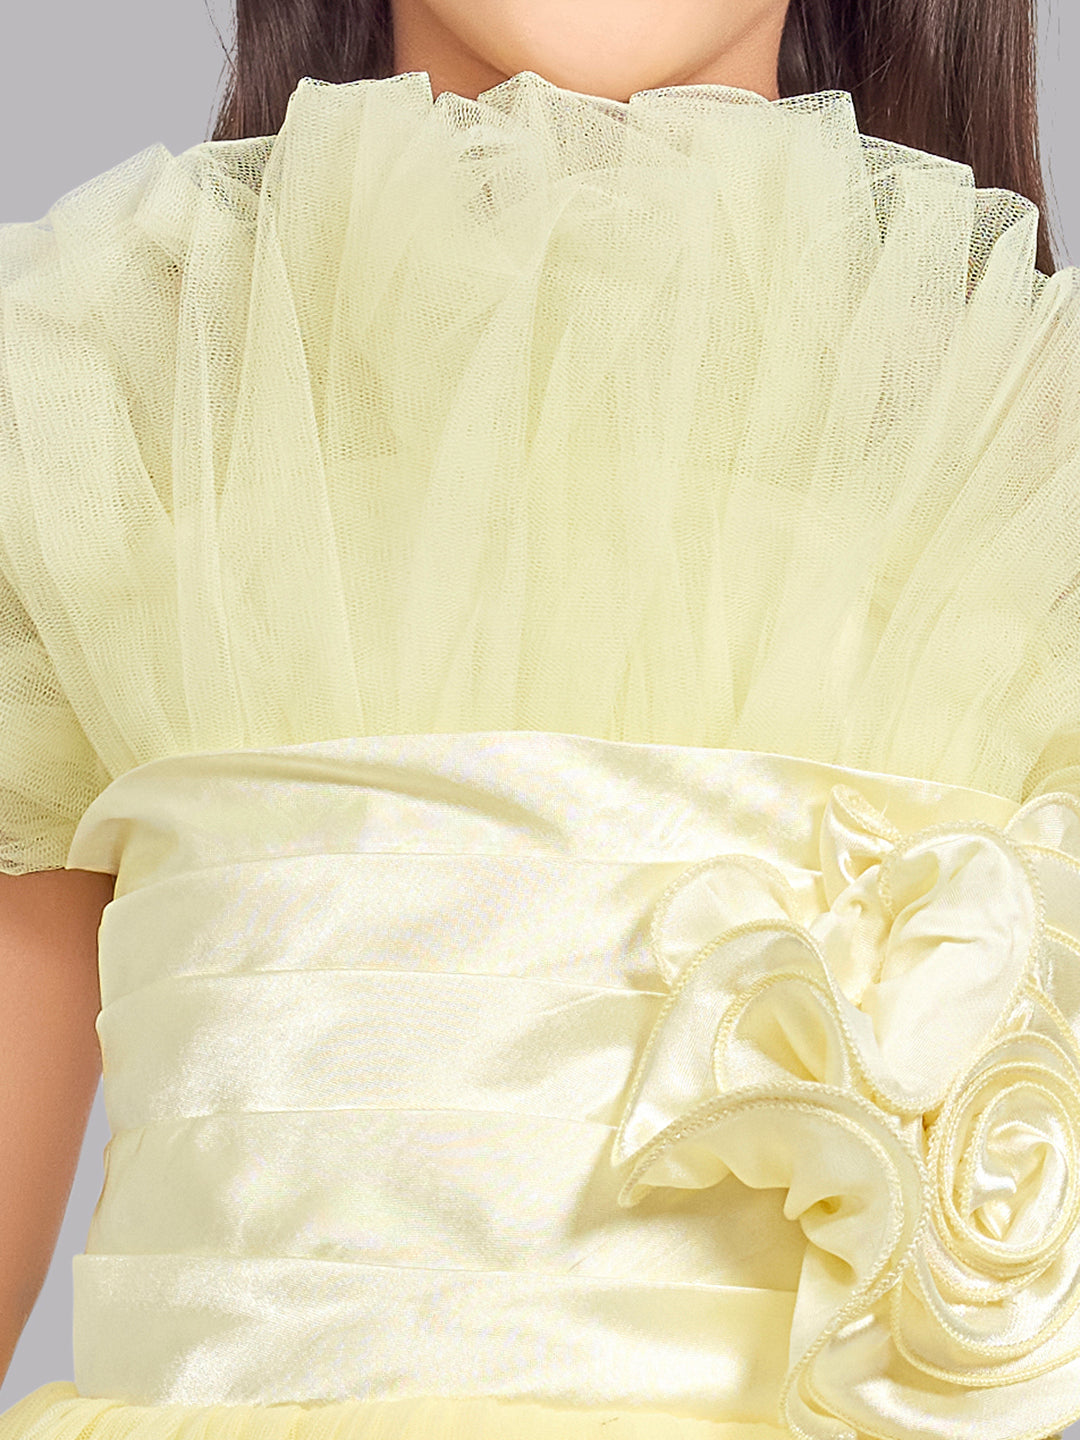 Ruffled Silhouette Party Dress -Yellow